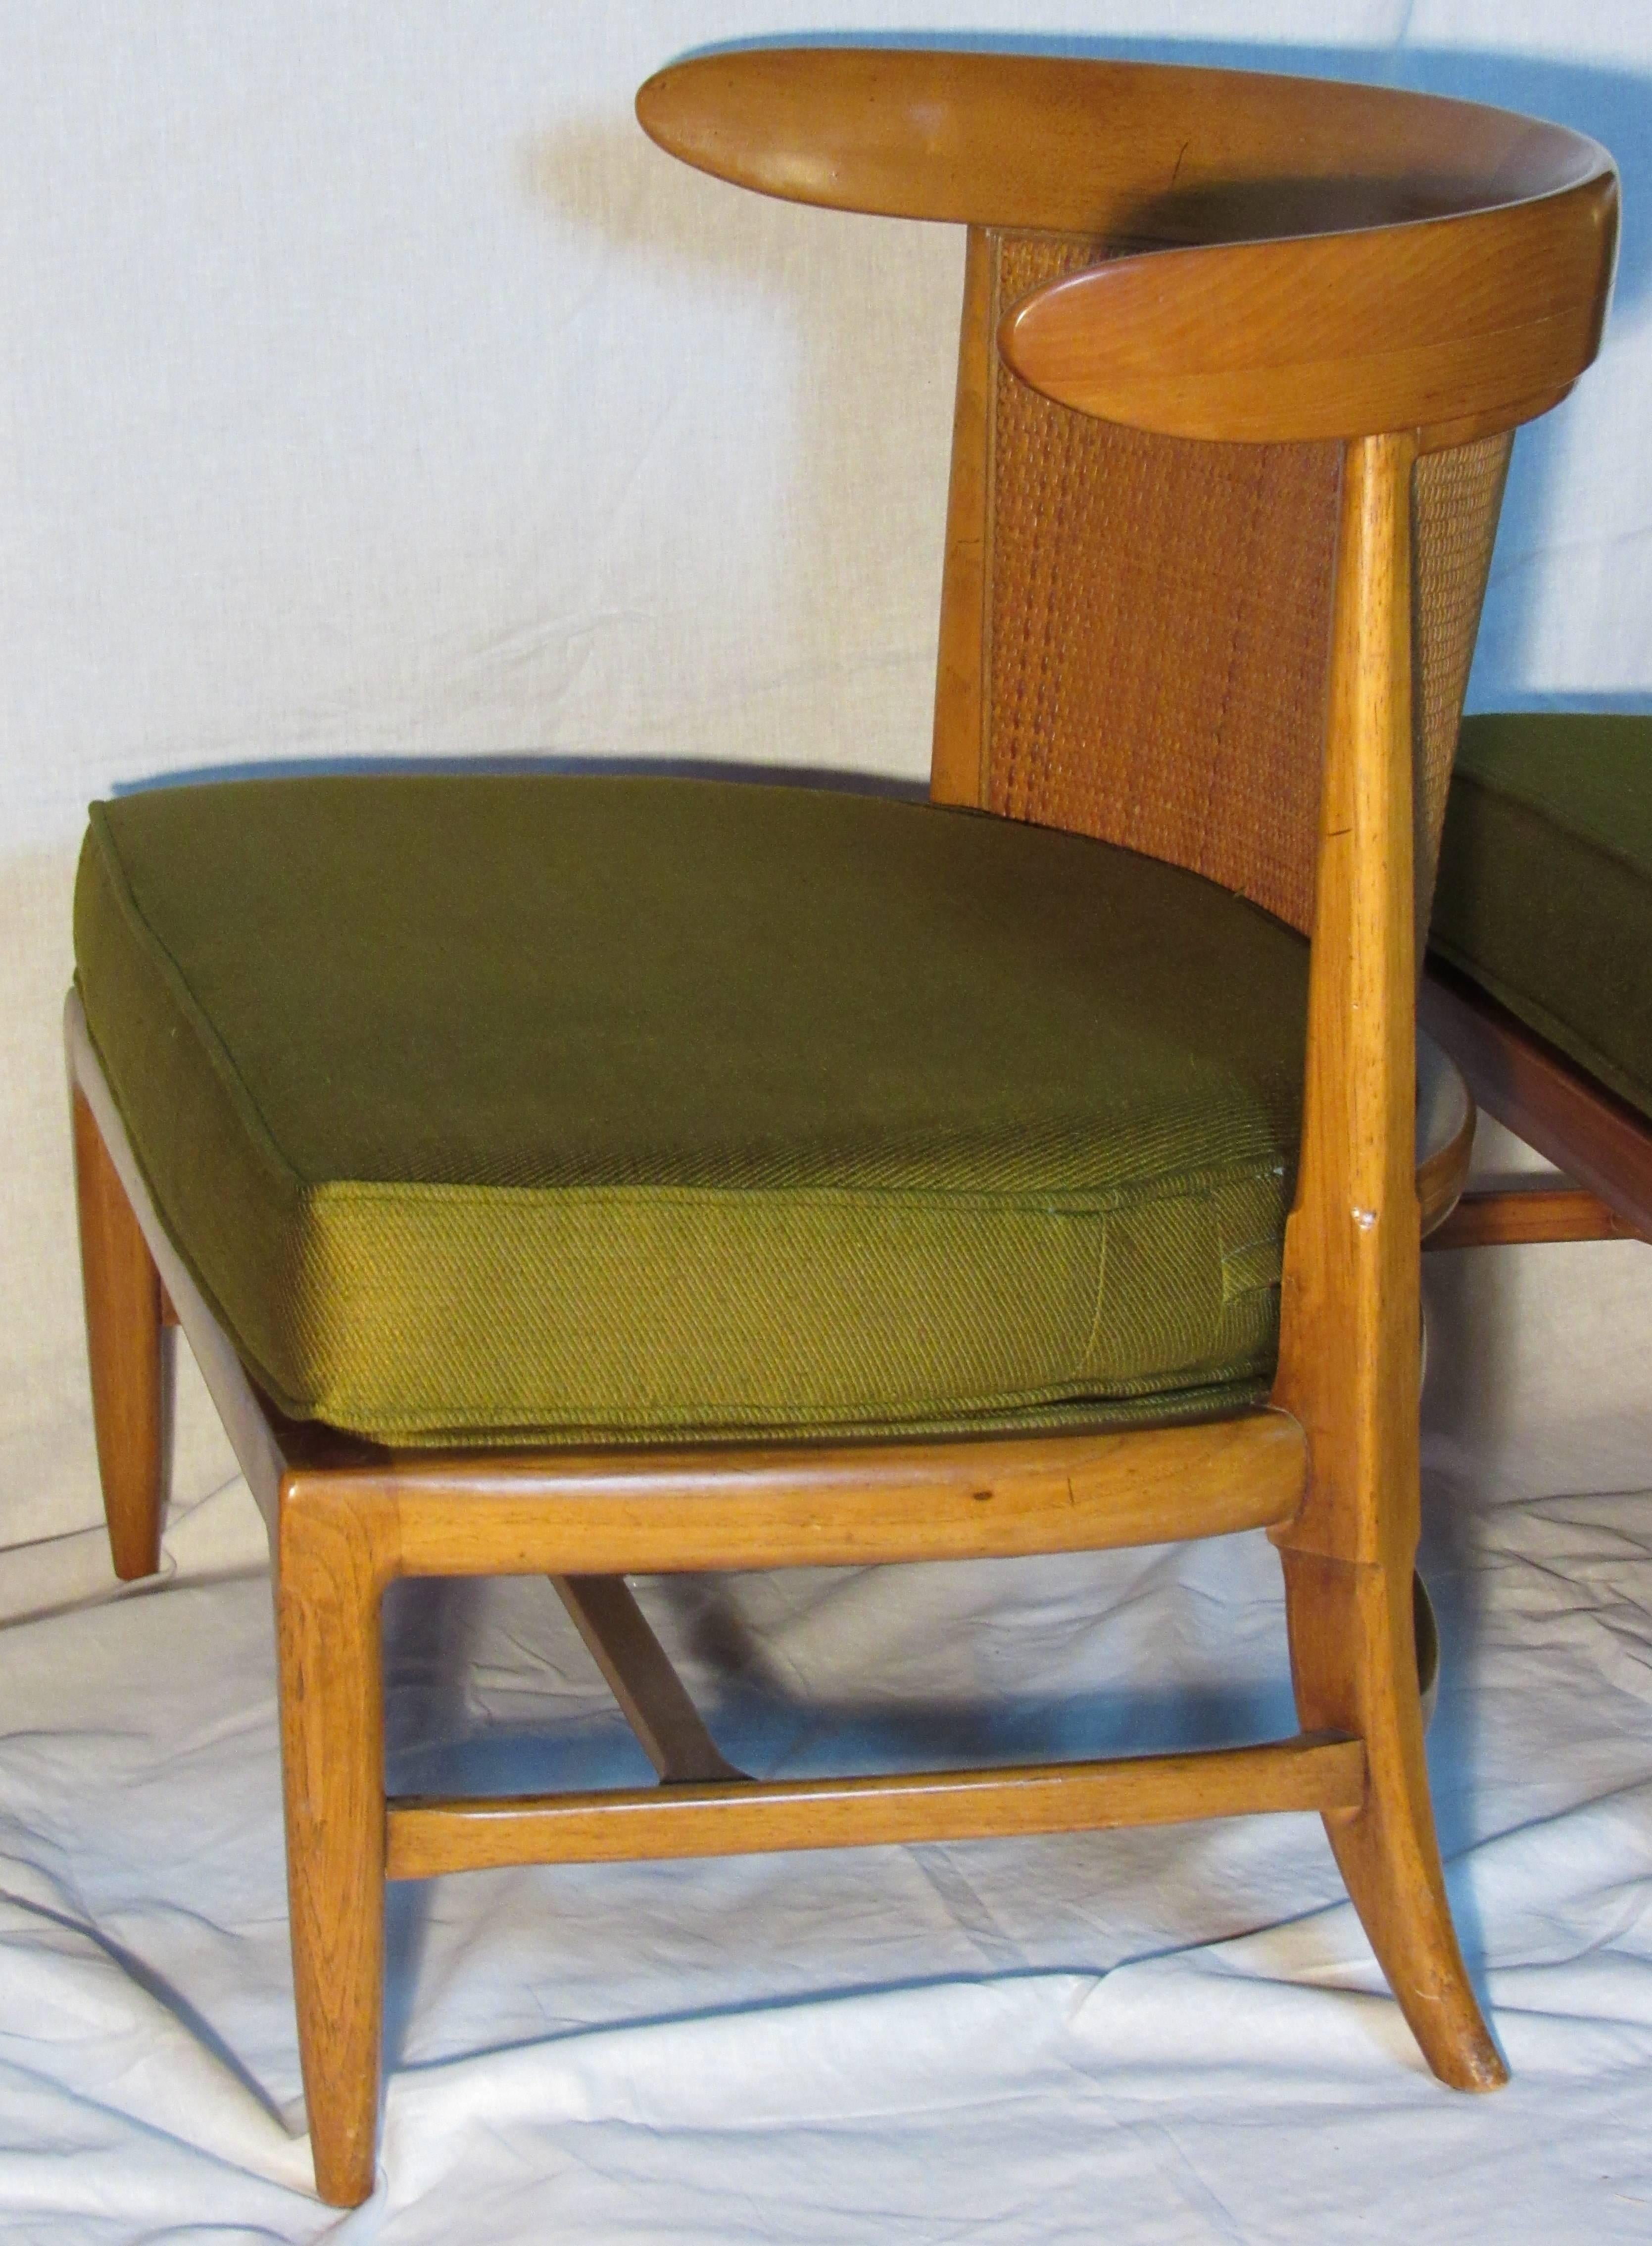 Four walnut slipper chairs with caned backs and vintage iridescent green cushion seats from the Sophisticate line for Tomlinson.
The chairs are in excellent vintage condition.